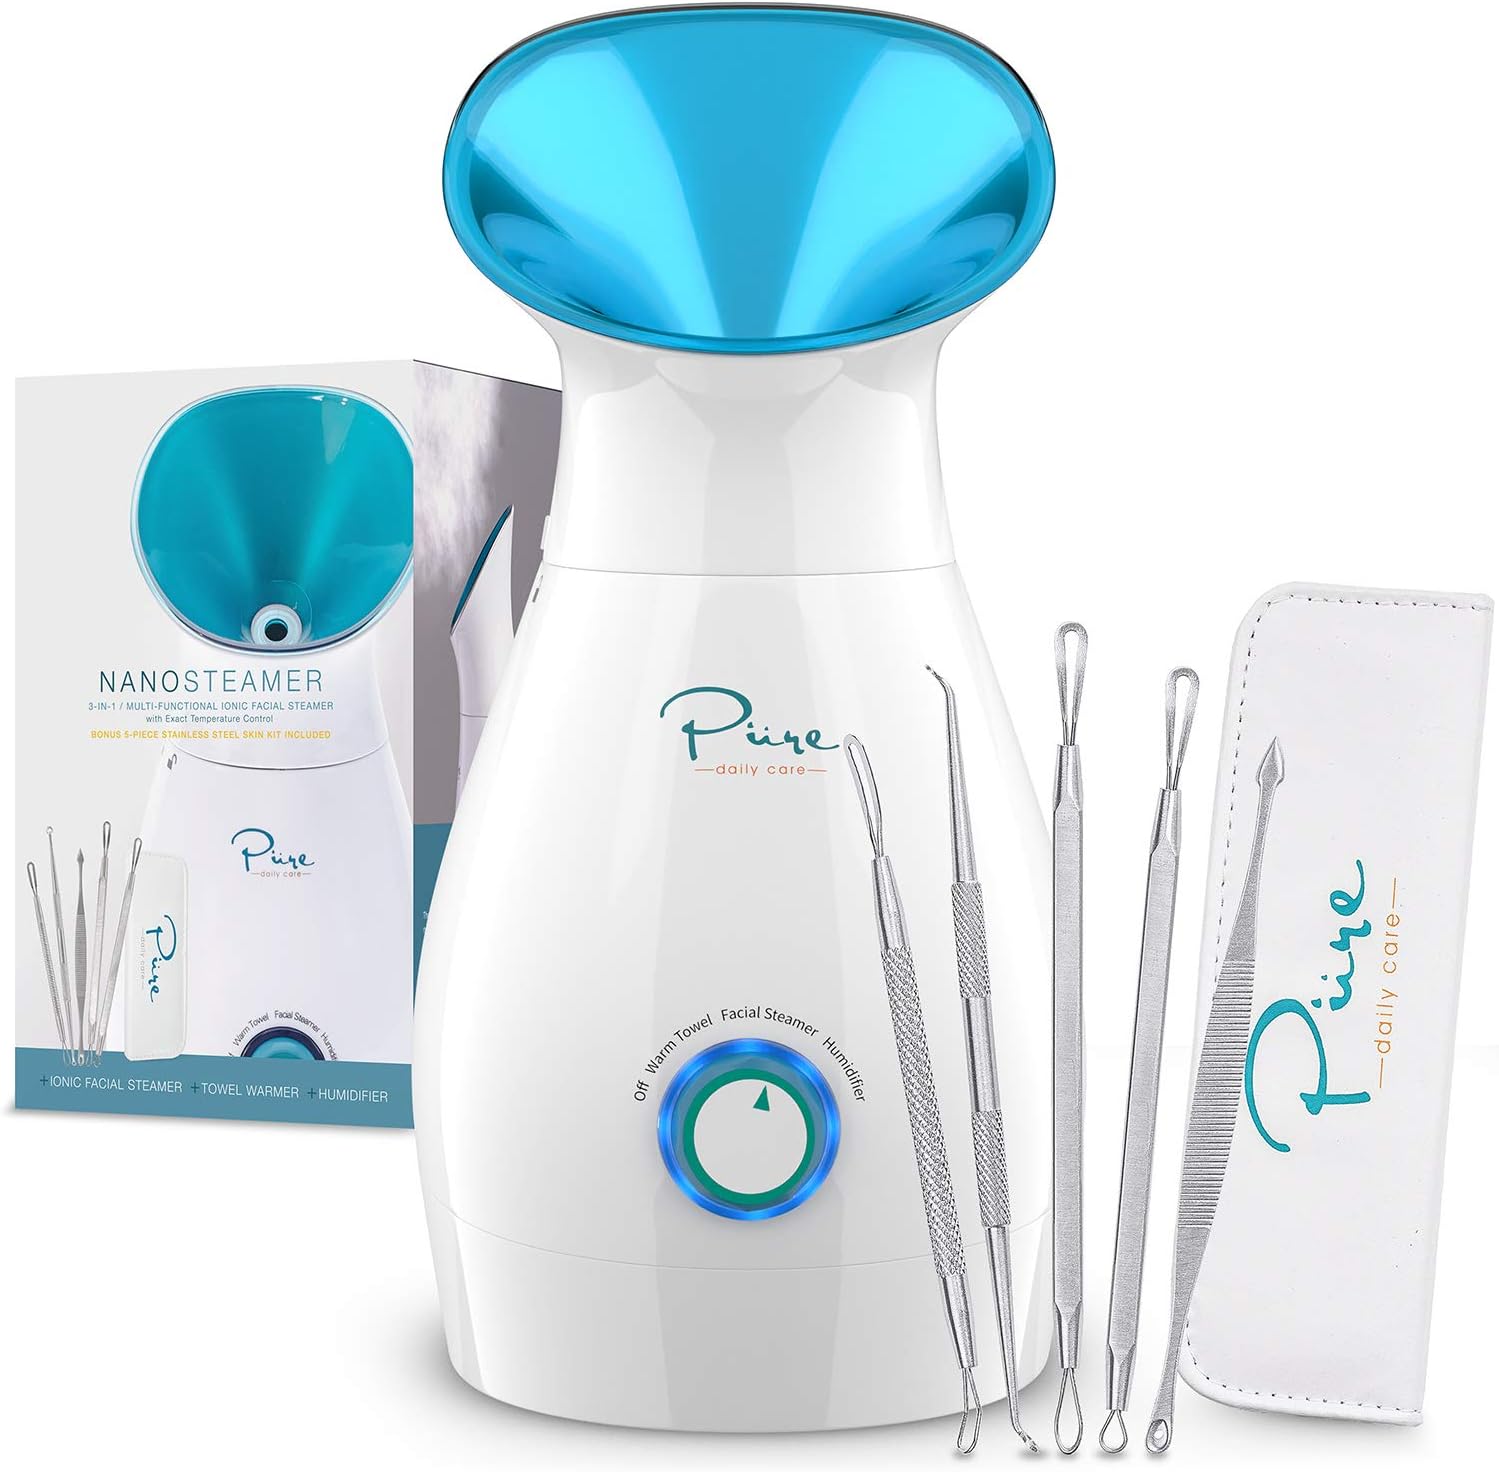 Pure Daily Care Facial Steamer 3-in-1 NanoSteamer with 5-Piece Stainless Steel Skin Care Kit, Large Teal - image 1 of 9